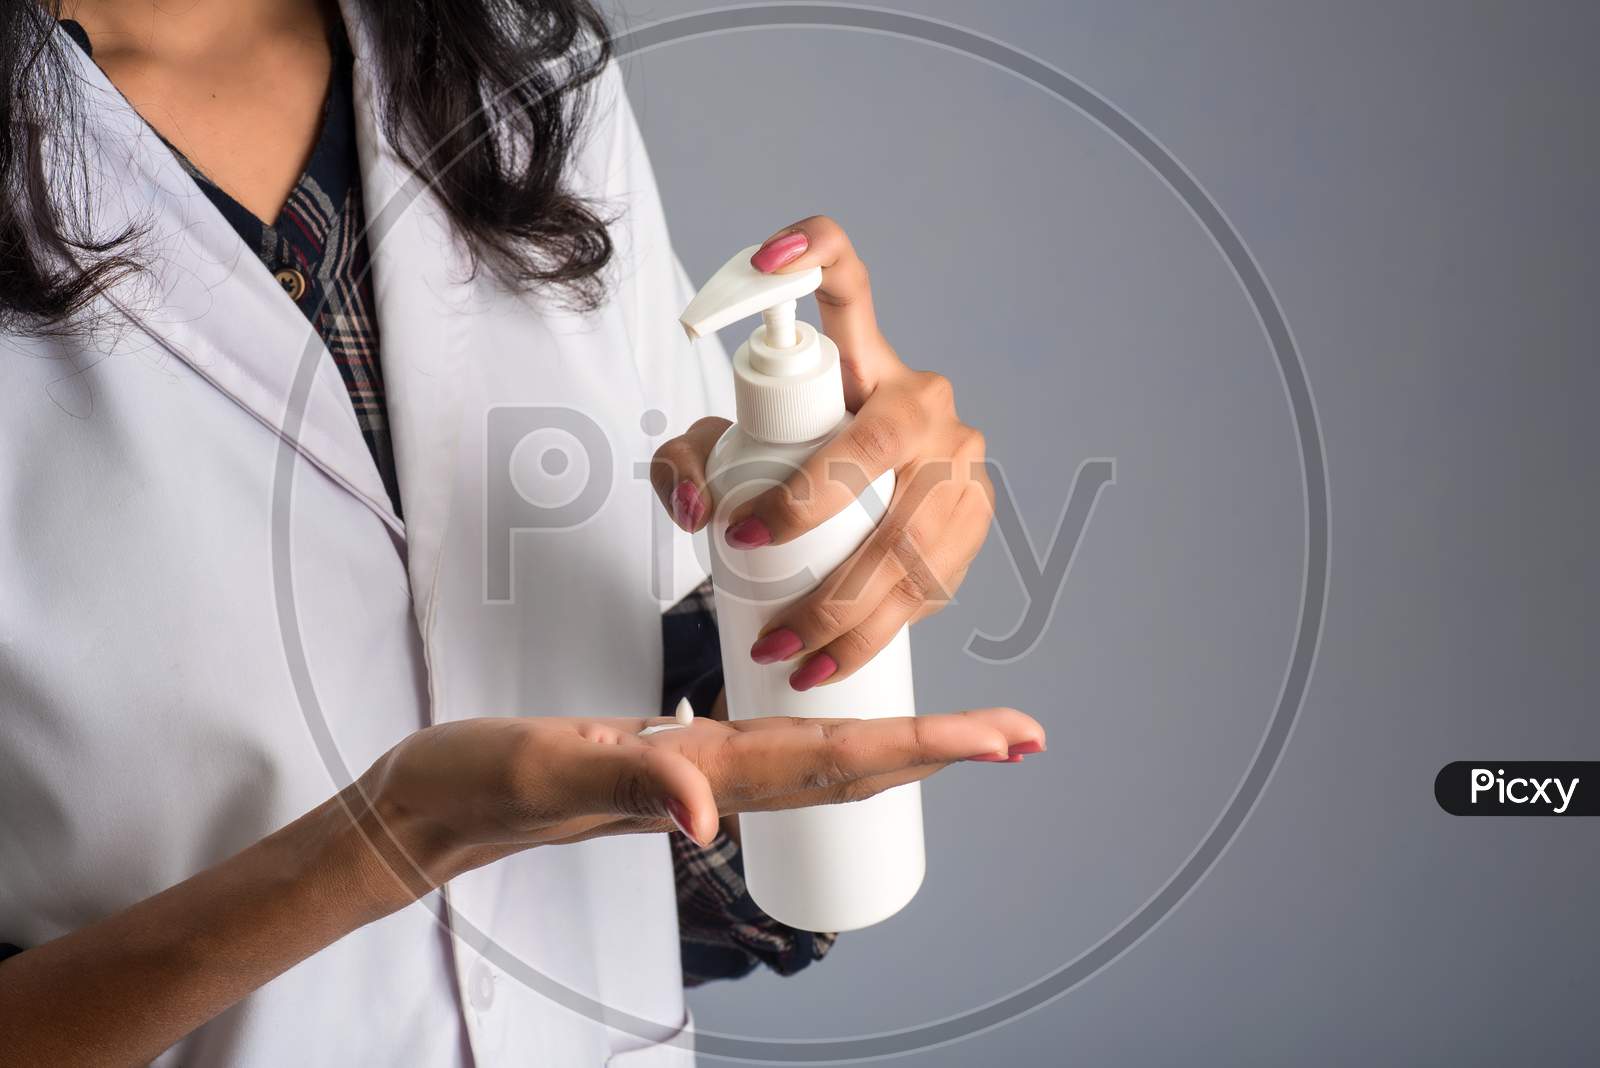 Portrait Of Woman Doctor Using A Sanitizing Gel From A Bottle For Hands Cleaning.